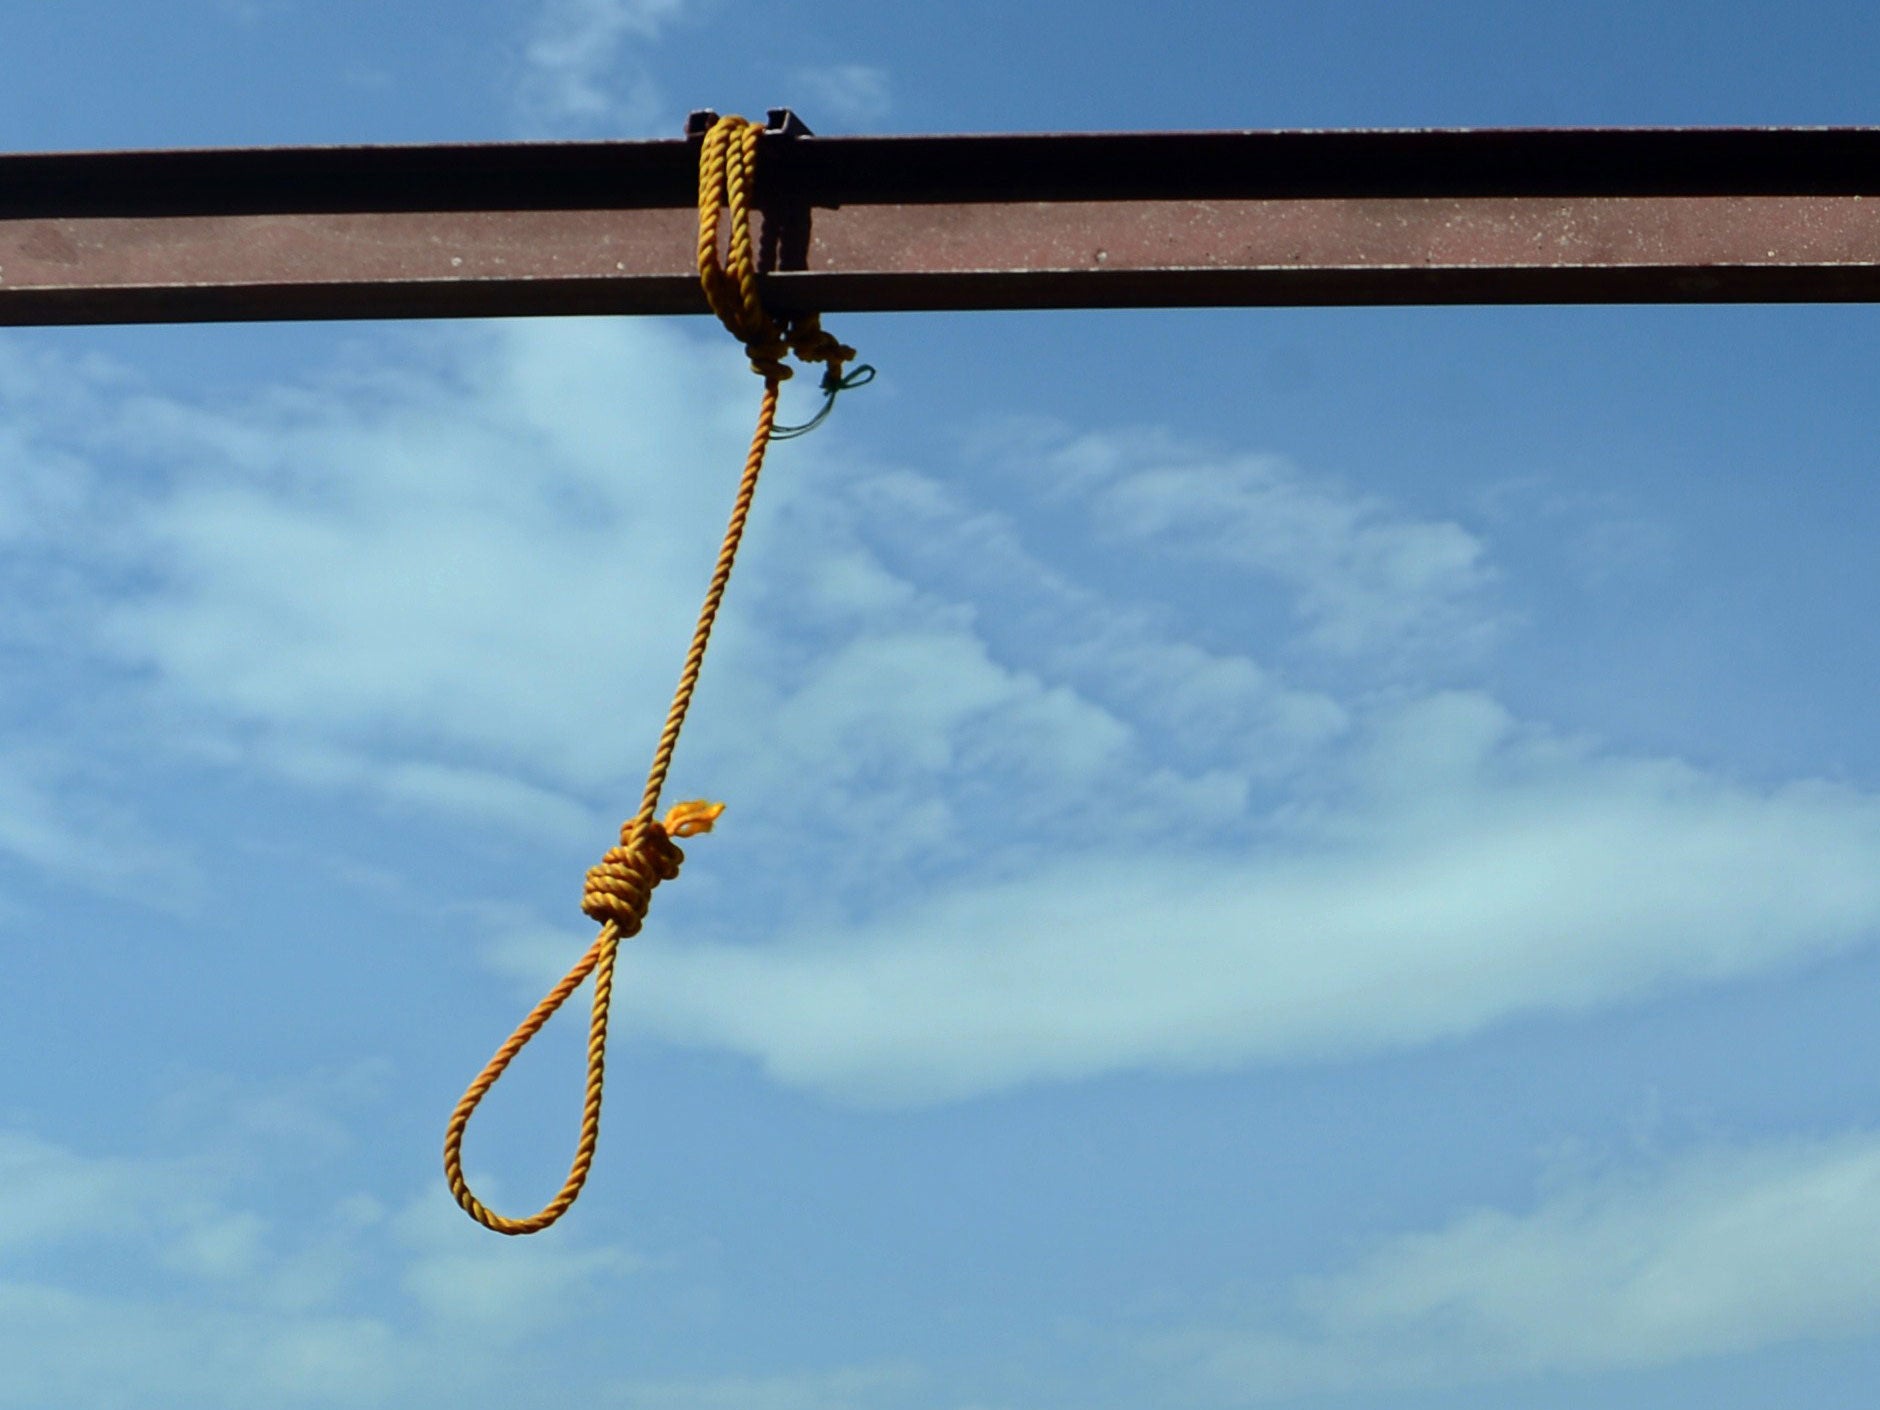 Pakistan has executed more than 400 people since it reintroduced the death penalty in 2014